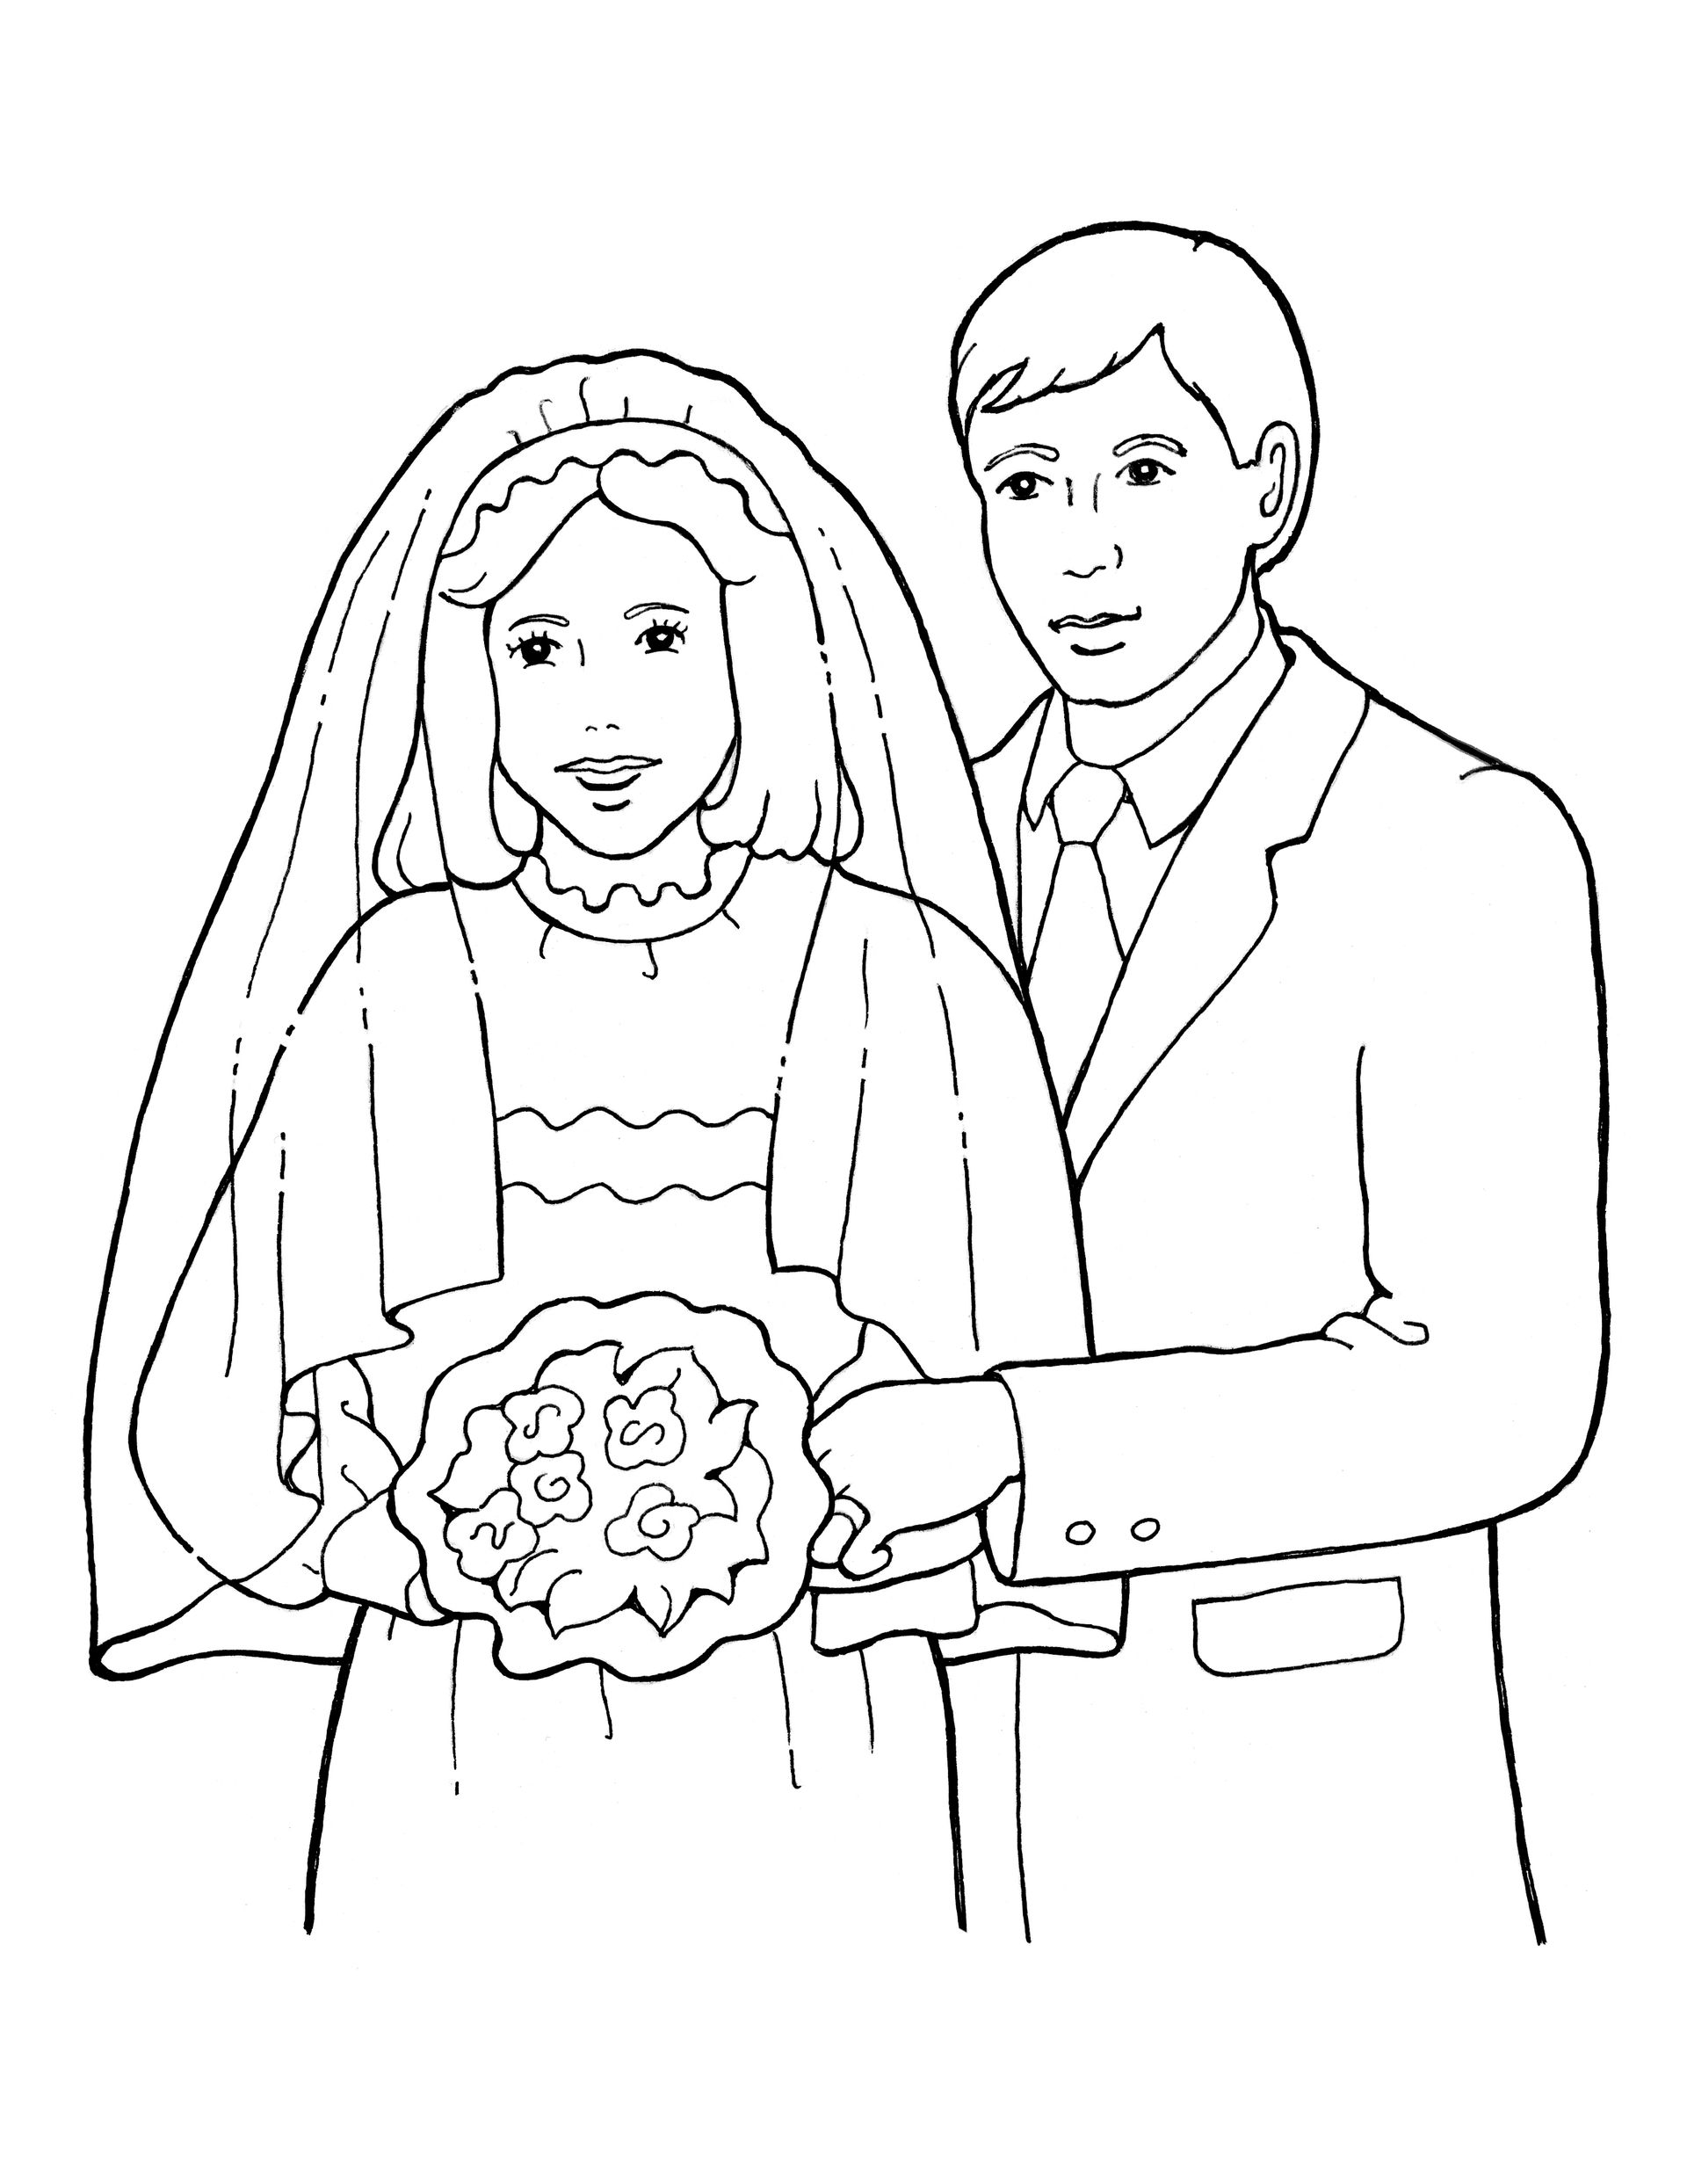 An illustration of marriage.